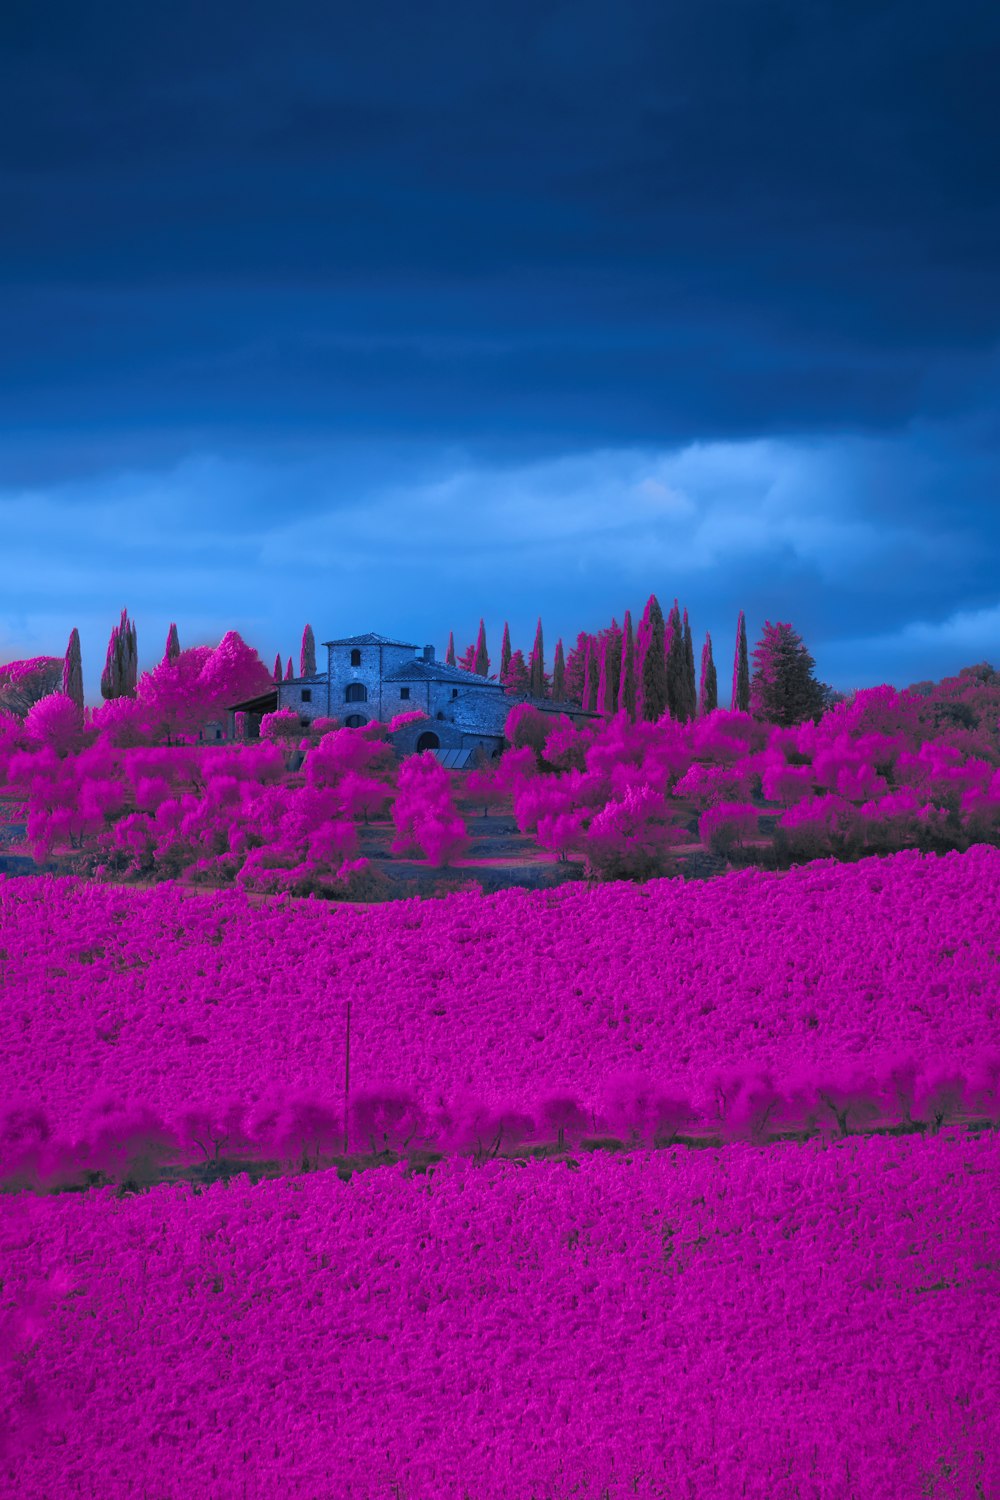 a house on a hill covered in pink flowers